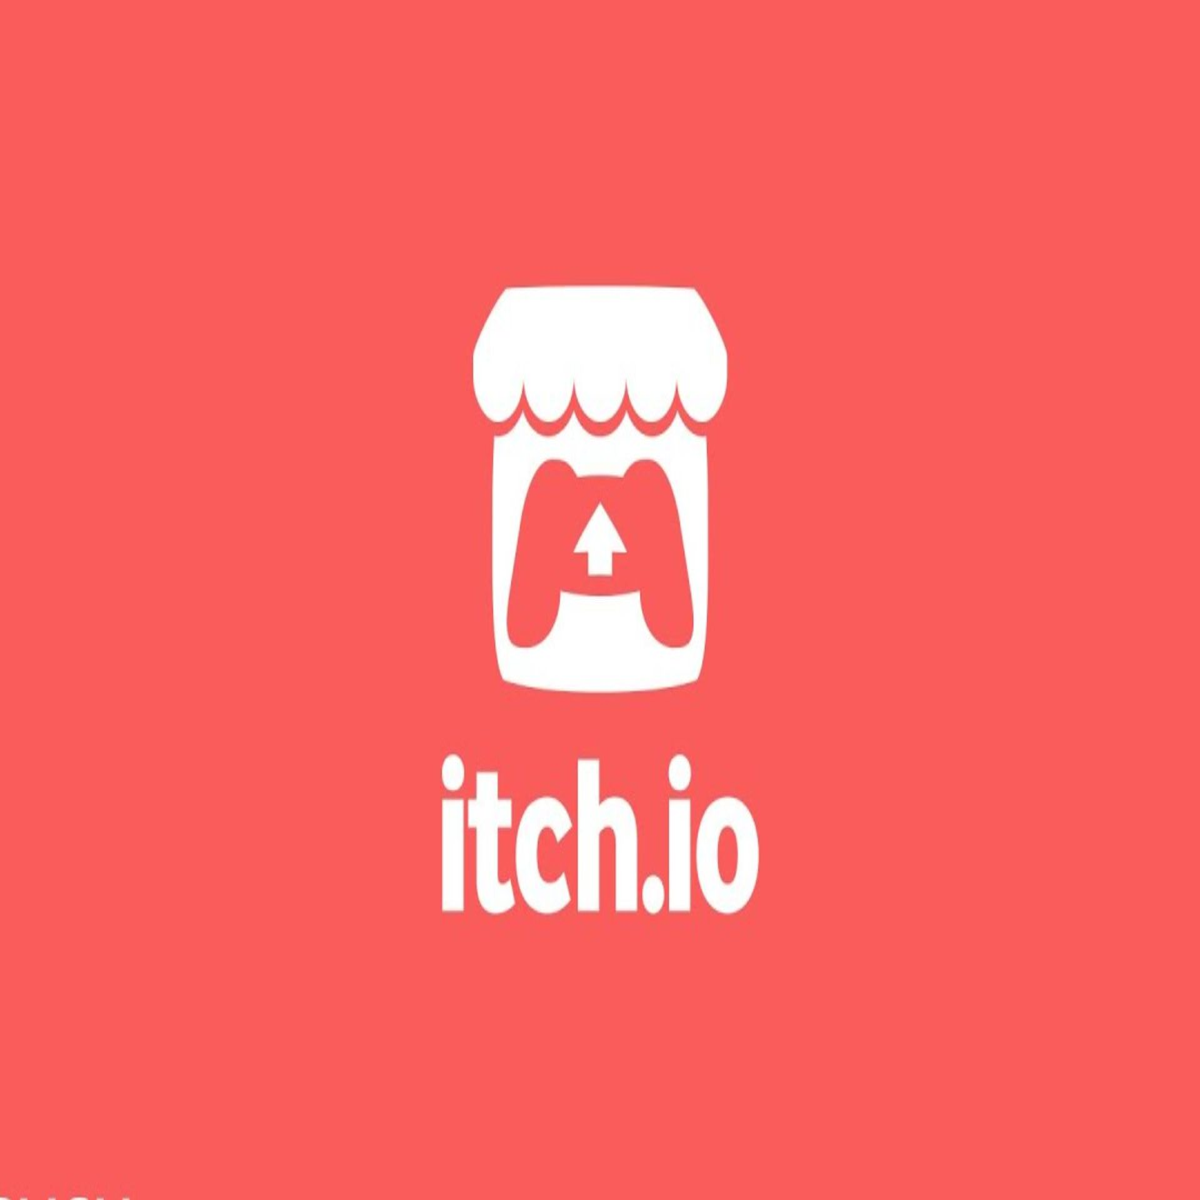 Owner of itch.io accuses newly launched alternative w3itch.io of theft